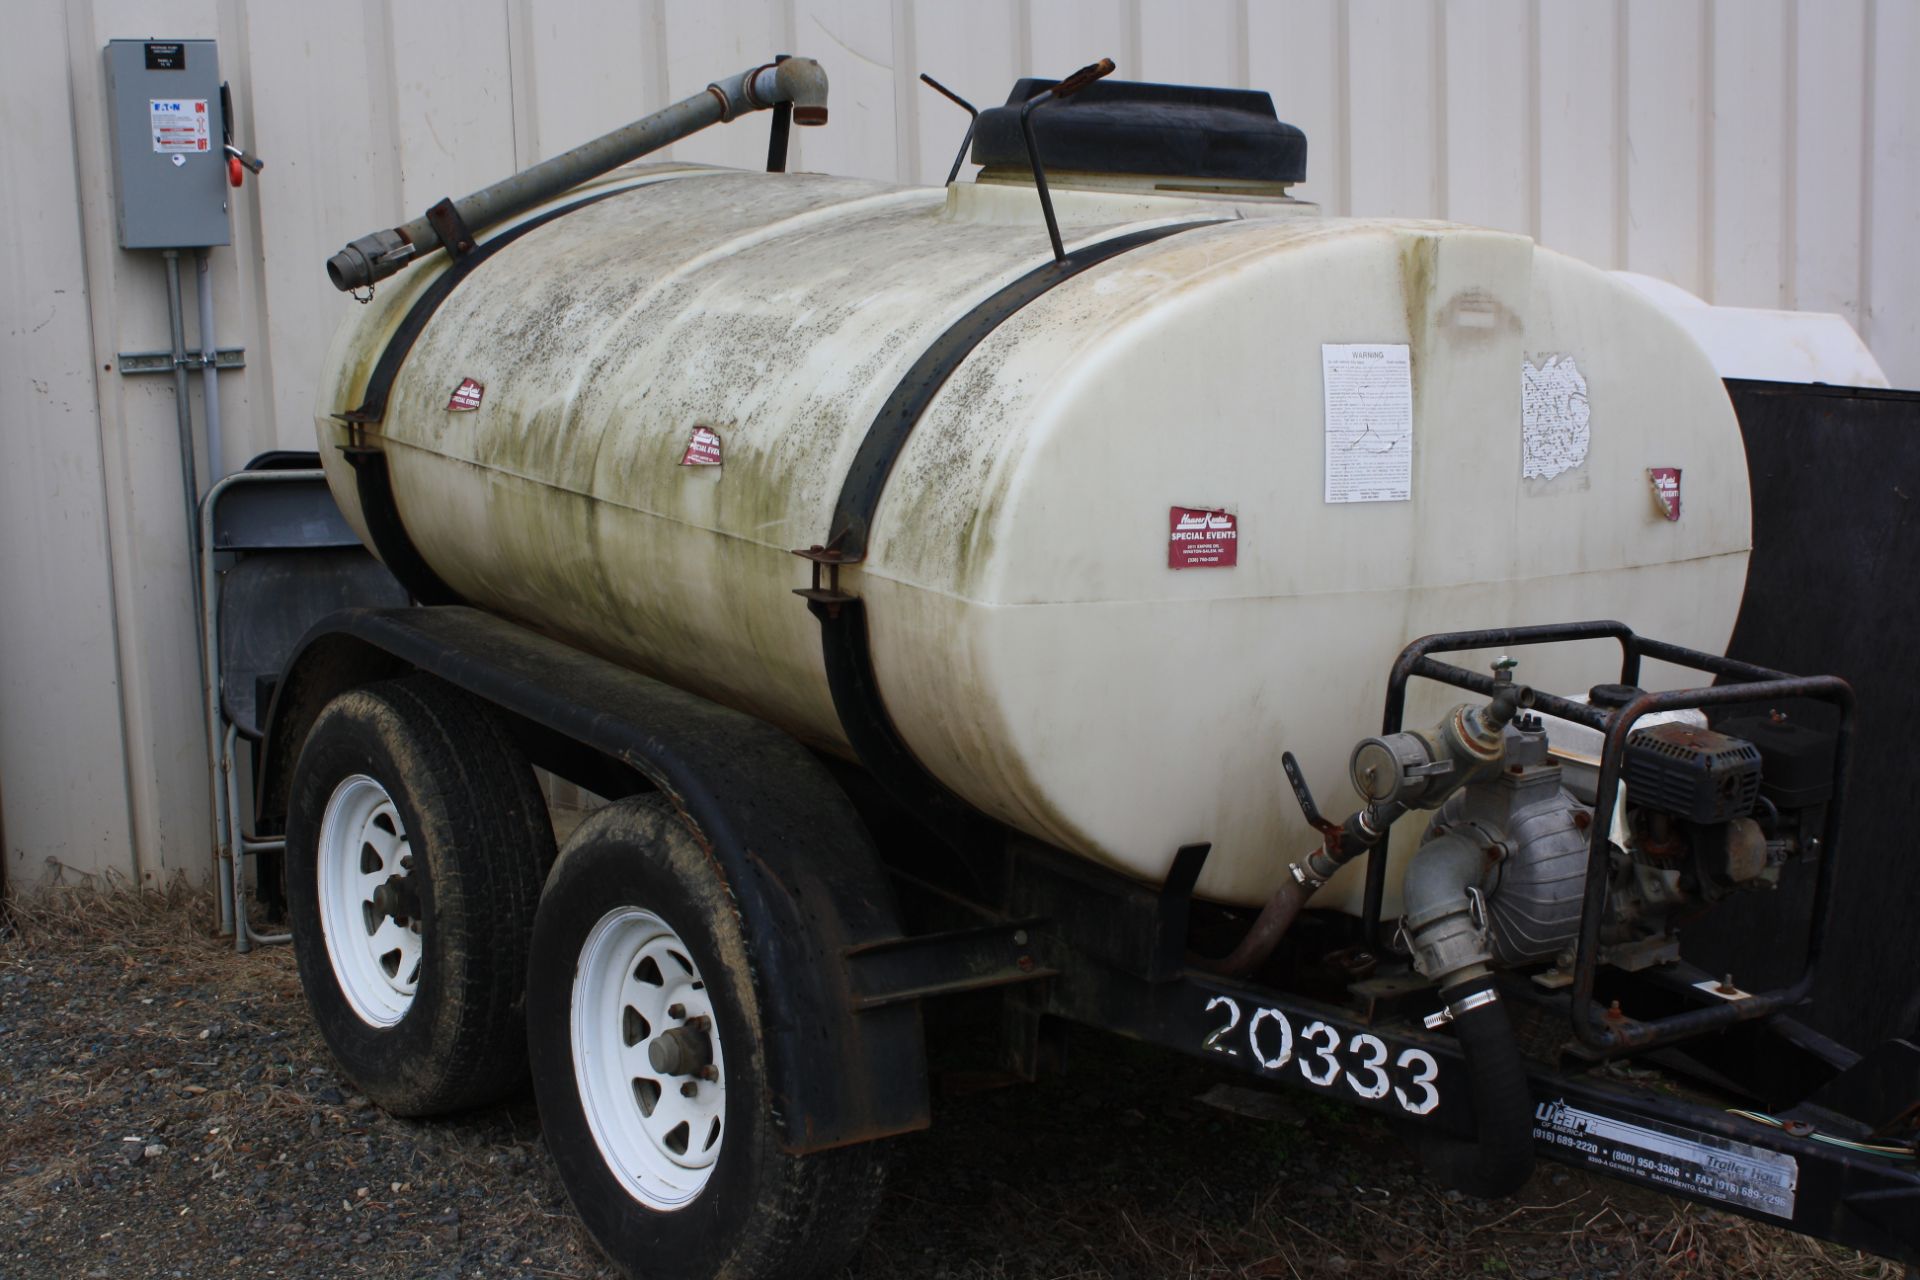 U-Cart Water Trailer Manu 2001, sold as shop built with Bill of Sale only.